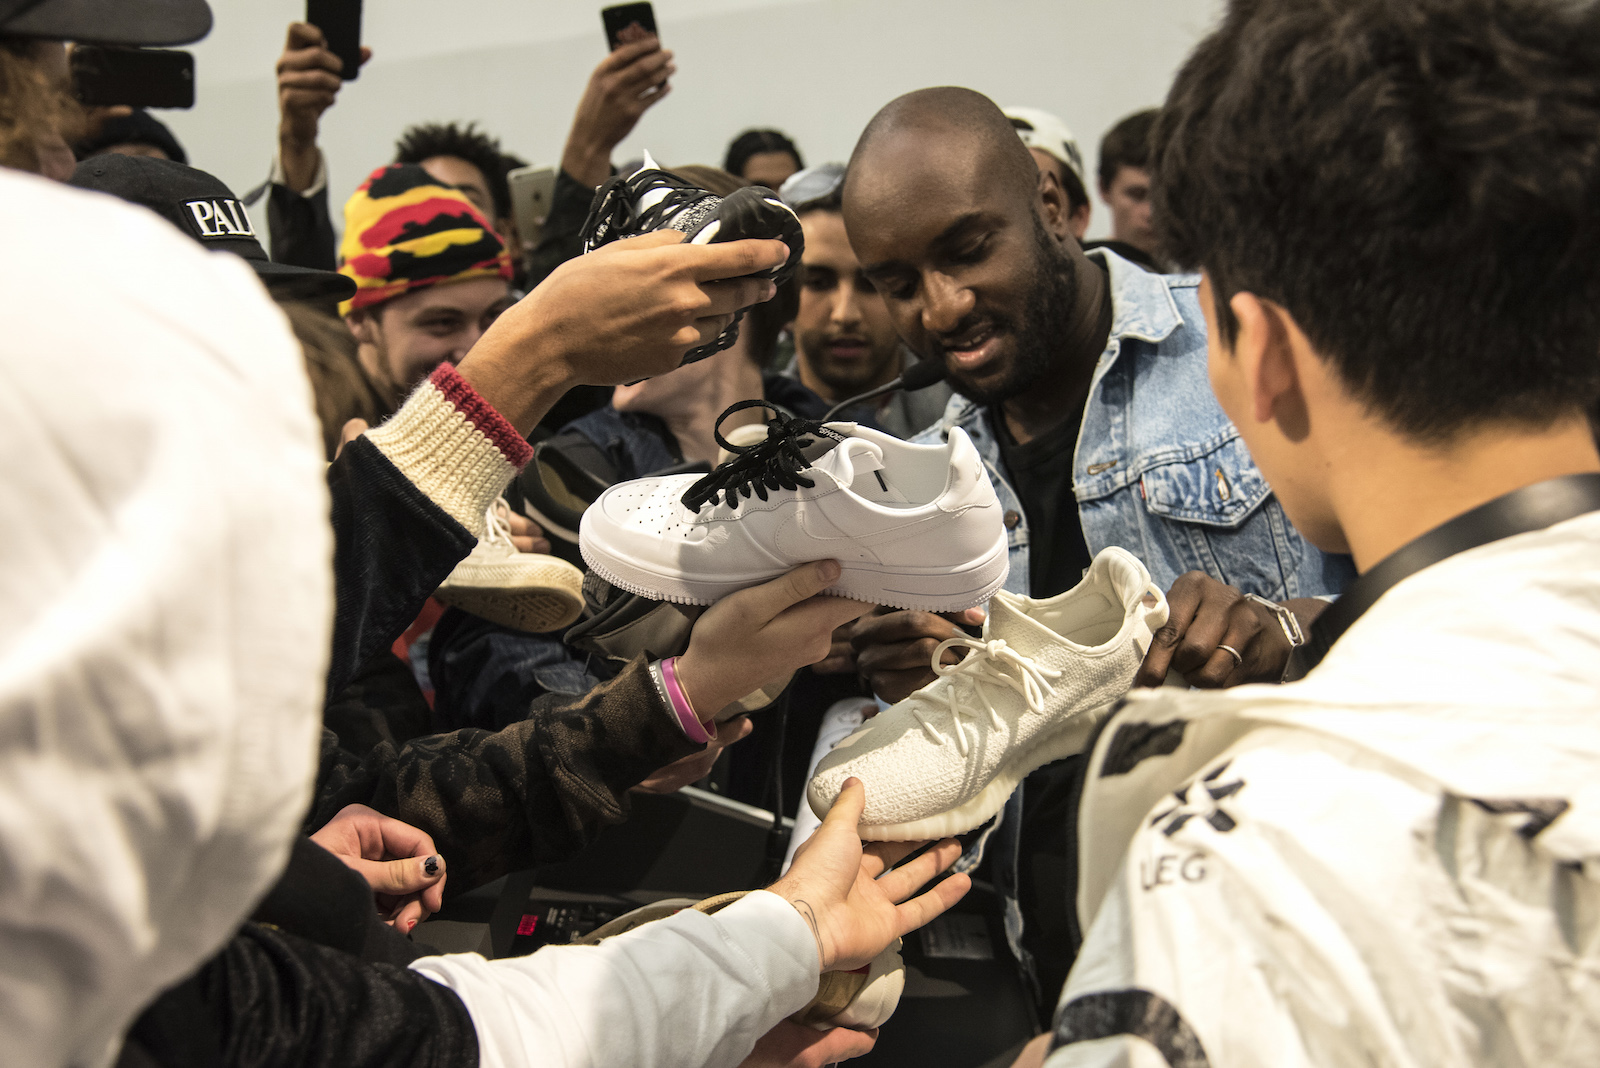 Introducing: “See Through” by Virgil Abloh